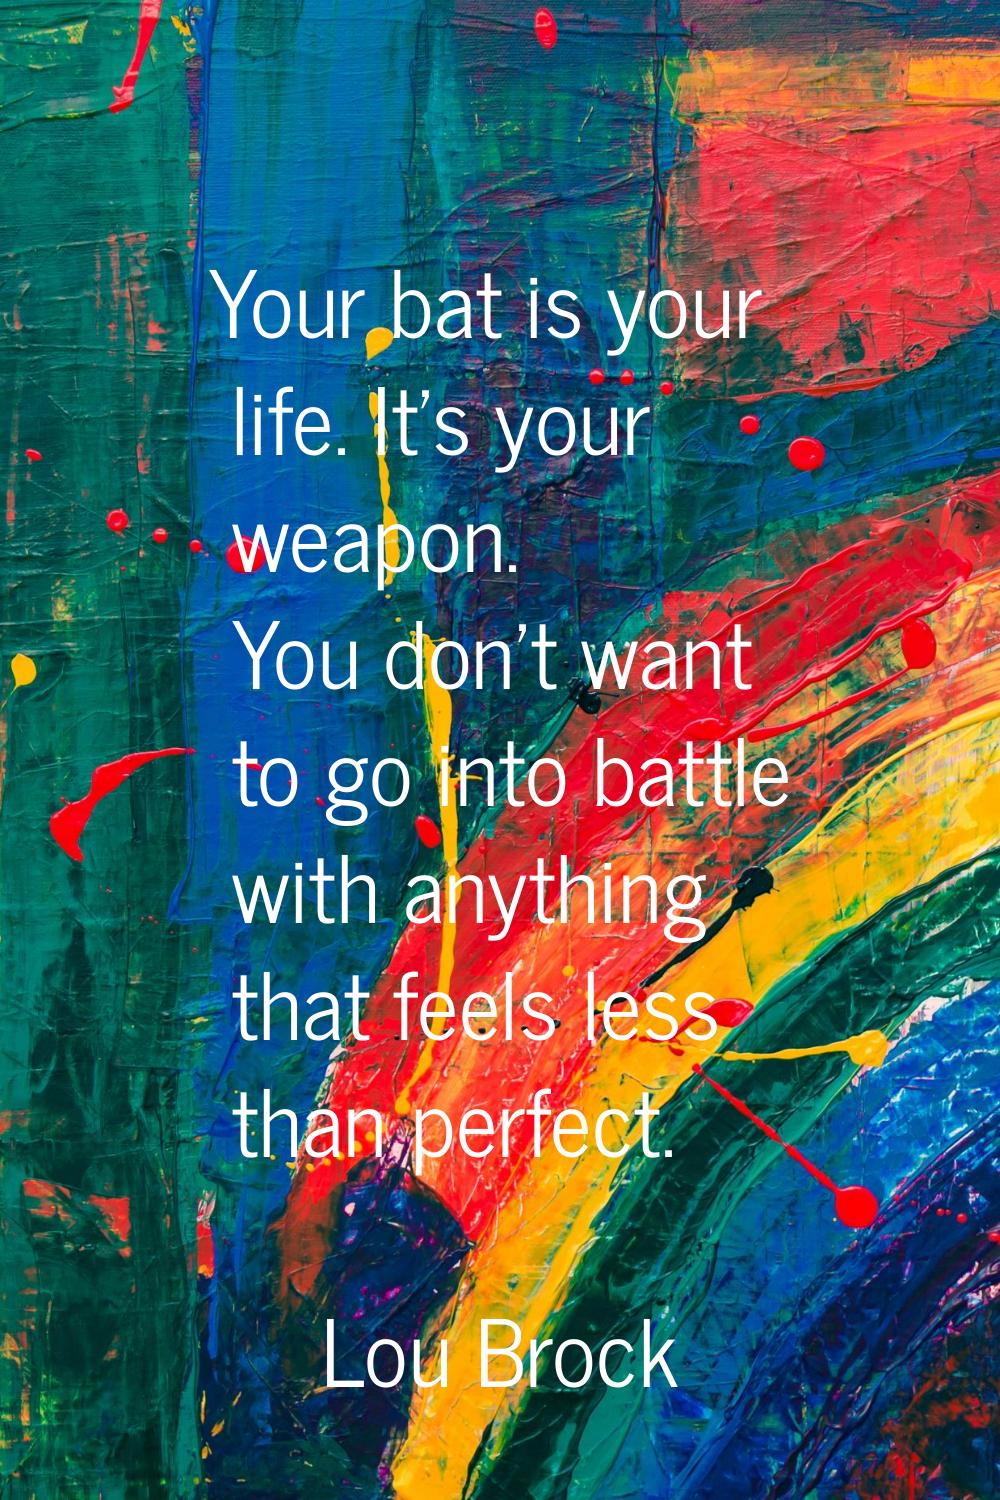 Your bat is your life. It's your weapon. You don't want to go into battle with anything that feels 